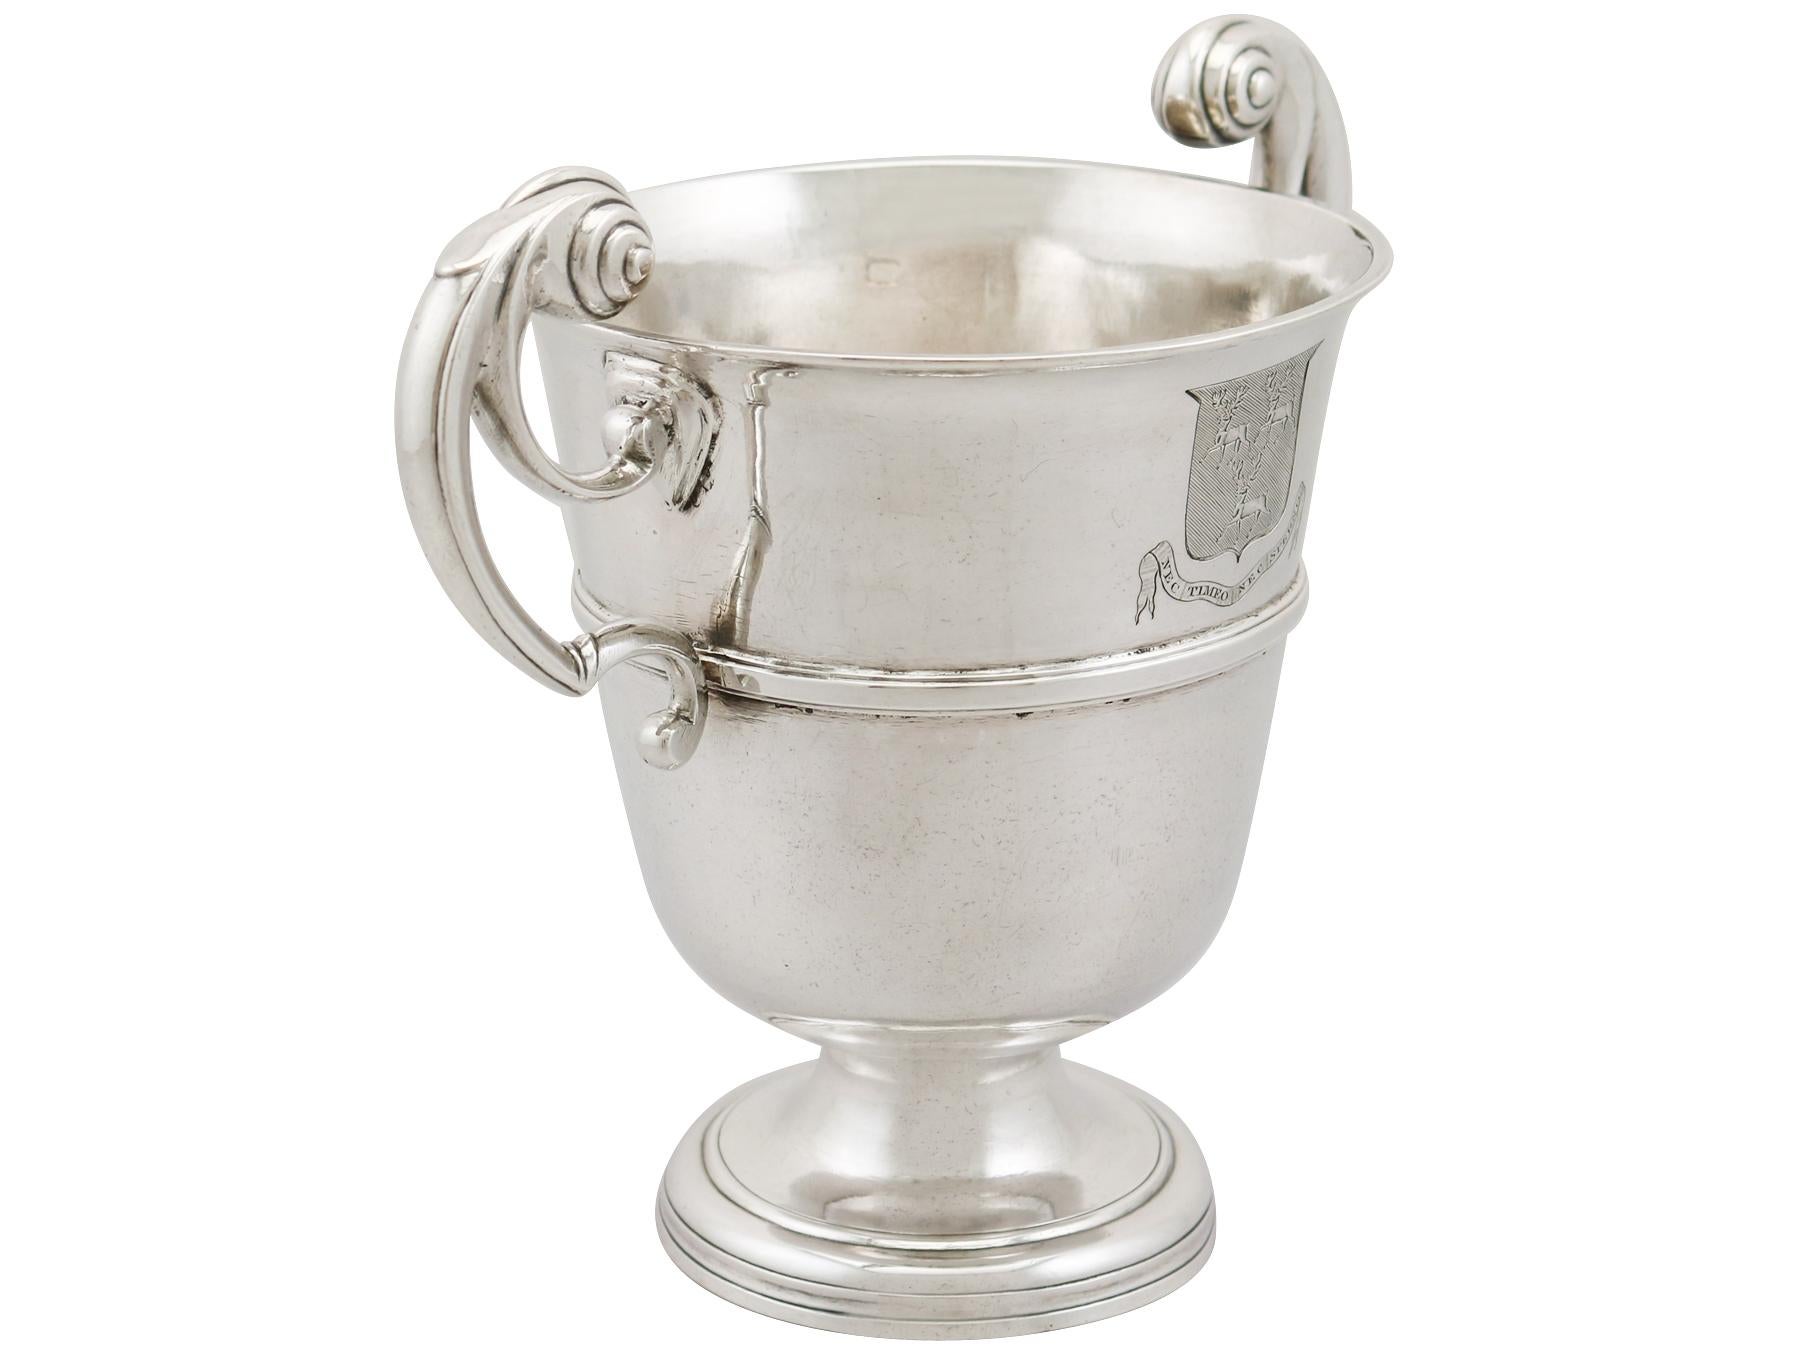 An exceptional, fine and impressive, rare antique Irish sterling silver loving cup, made in Cork by George Hodder; an addition to our ornamental silverware collection.

This exceptional antique Irish sterling silver loving cup has a plain bell